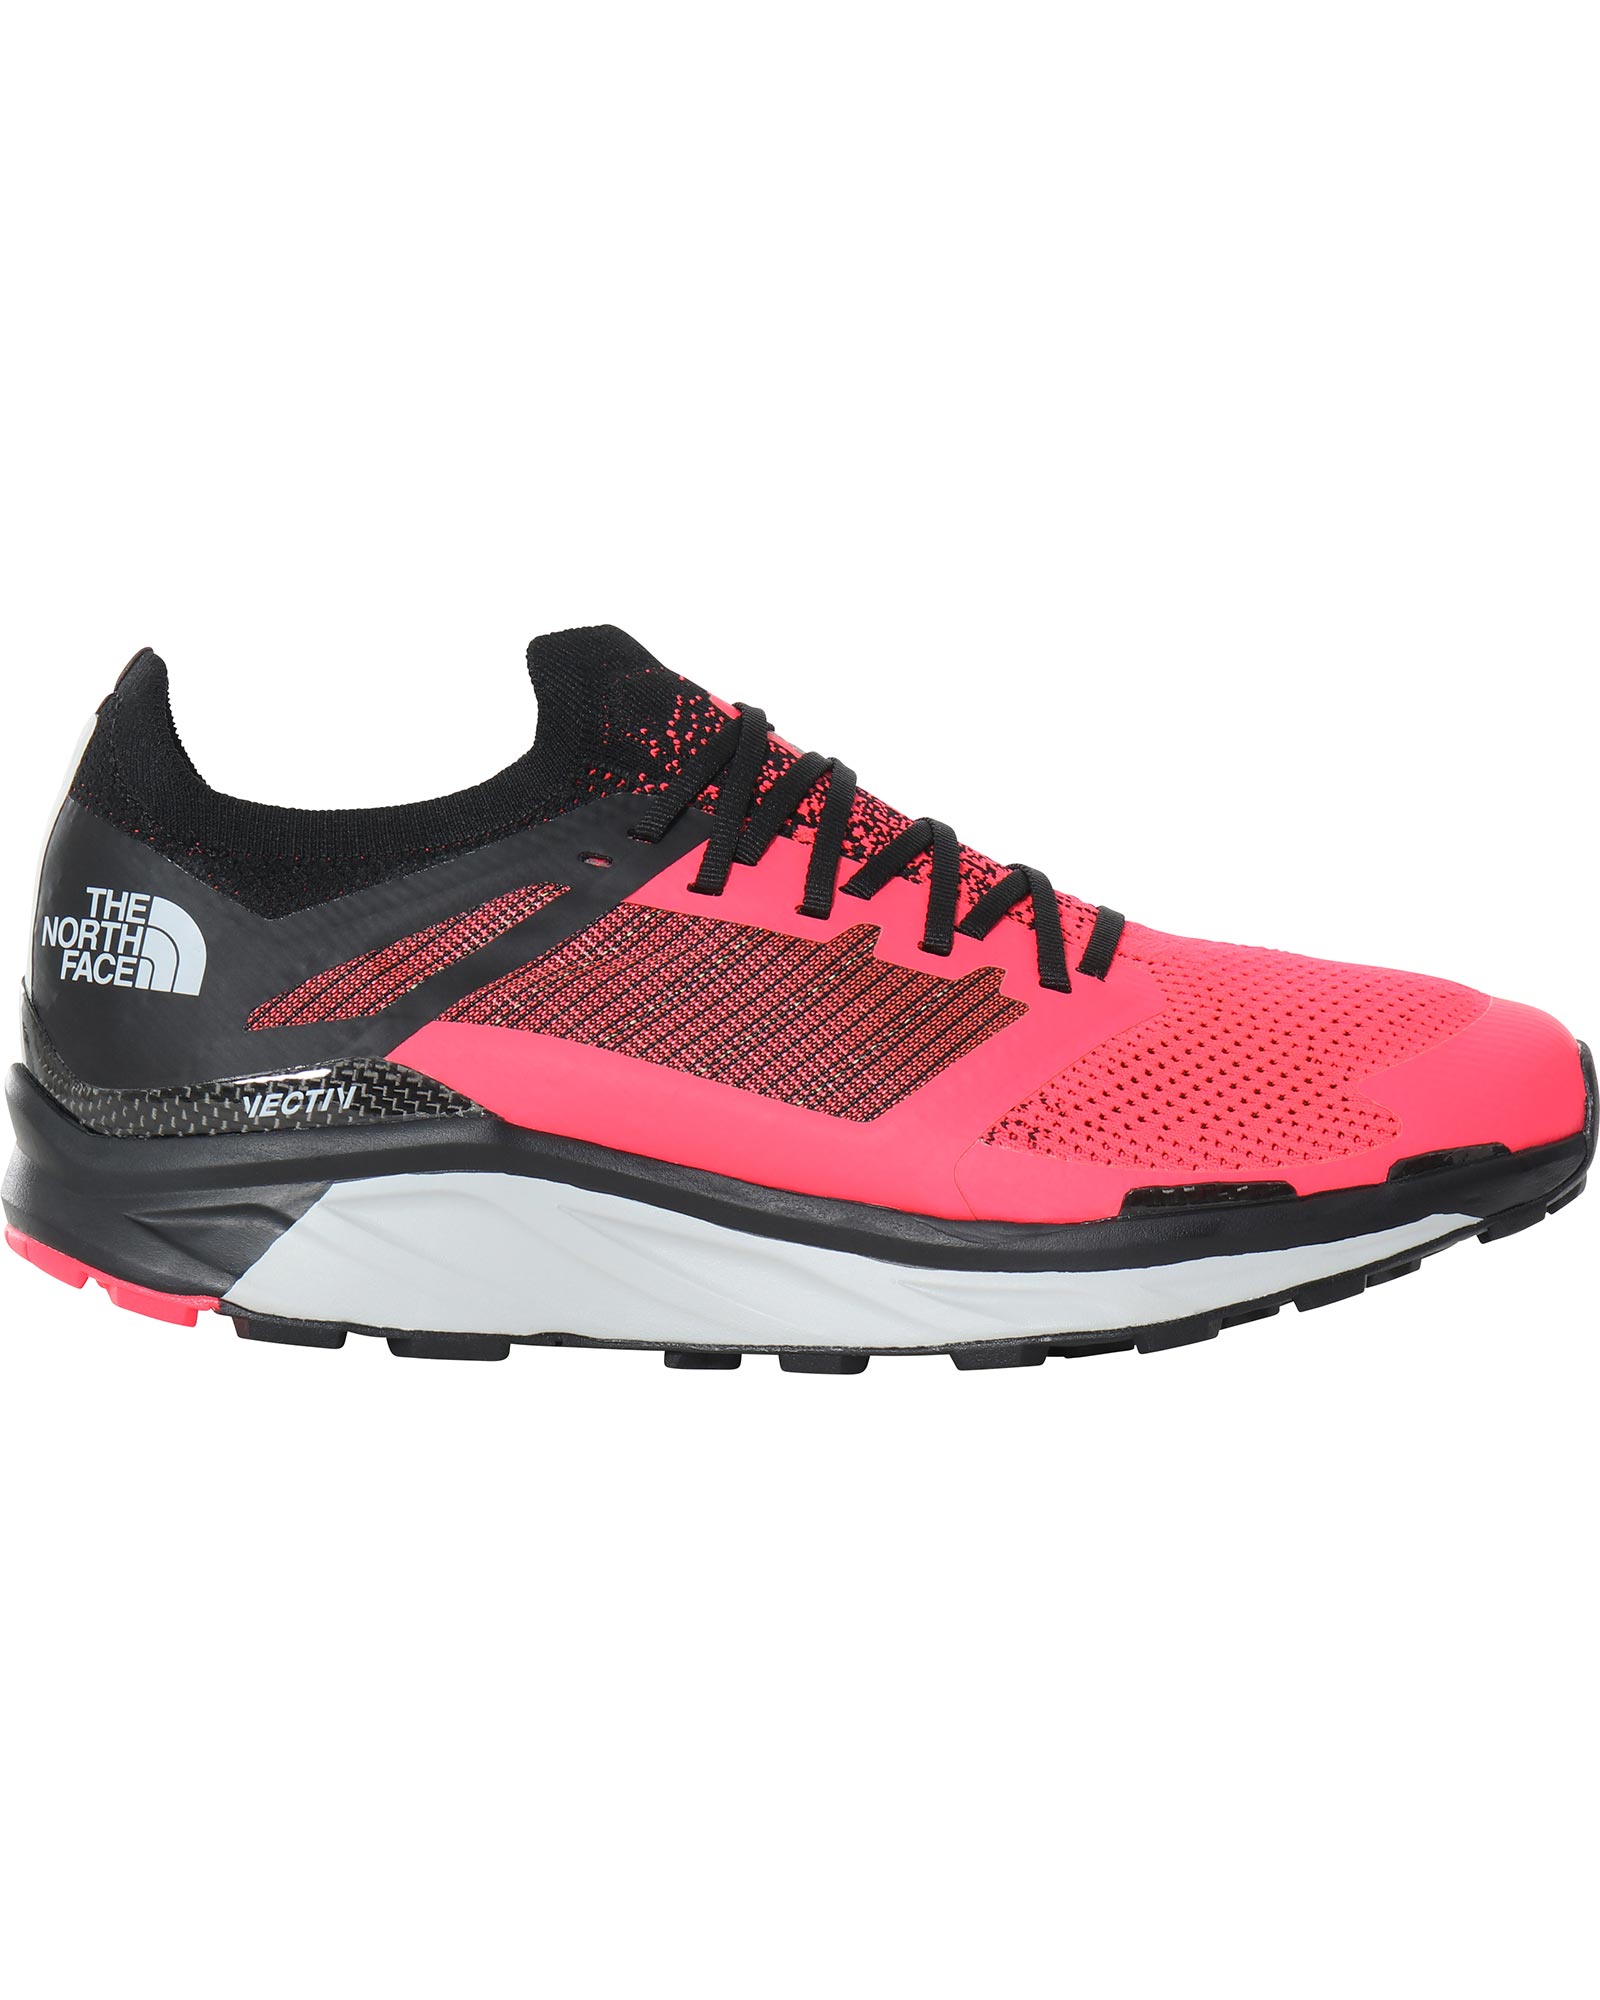 The North Face Men's Flight Vectiv Trail Running Shoes 0